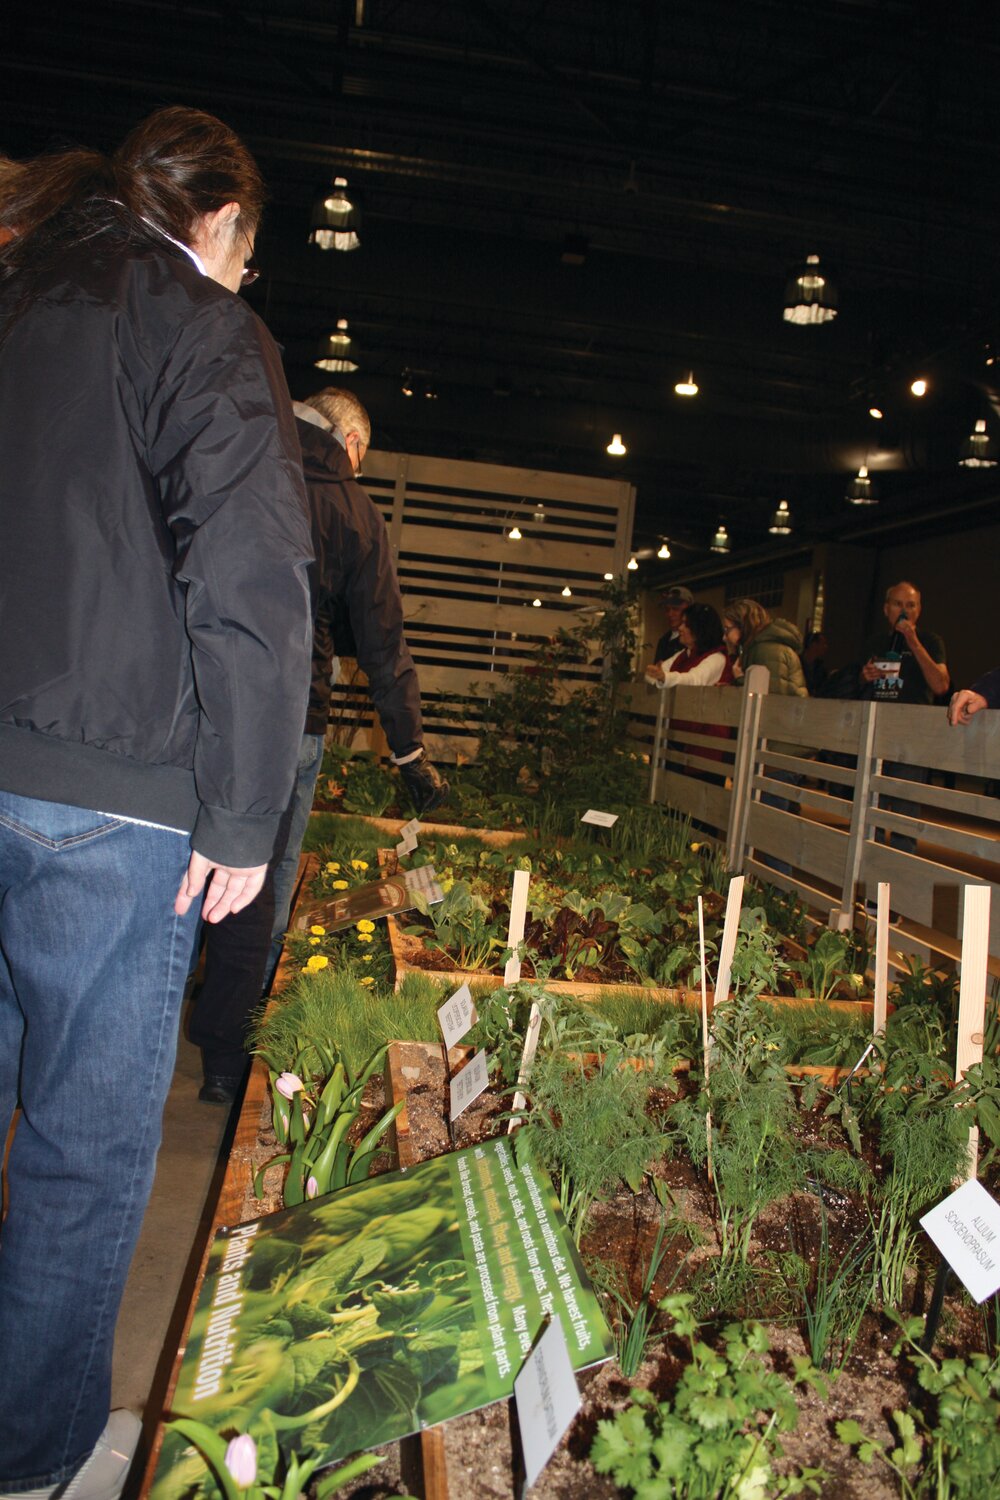 Flower show attendees look at plant beds created by Delaware Valley University for its exhibit, “Lettuce Turnip the Beet: The Gritty Value of Plants.”